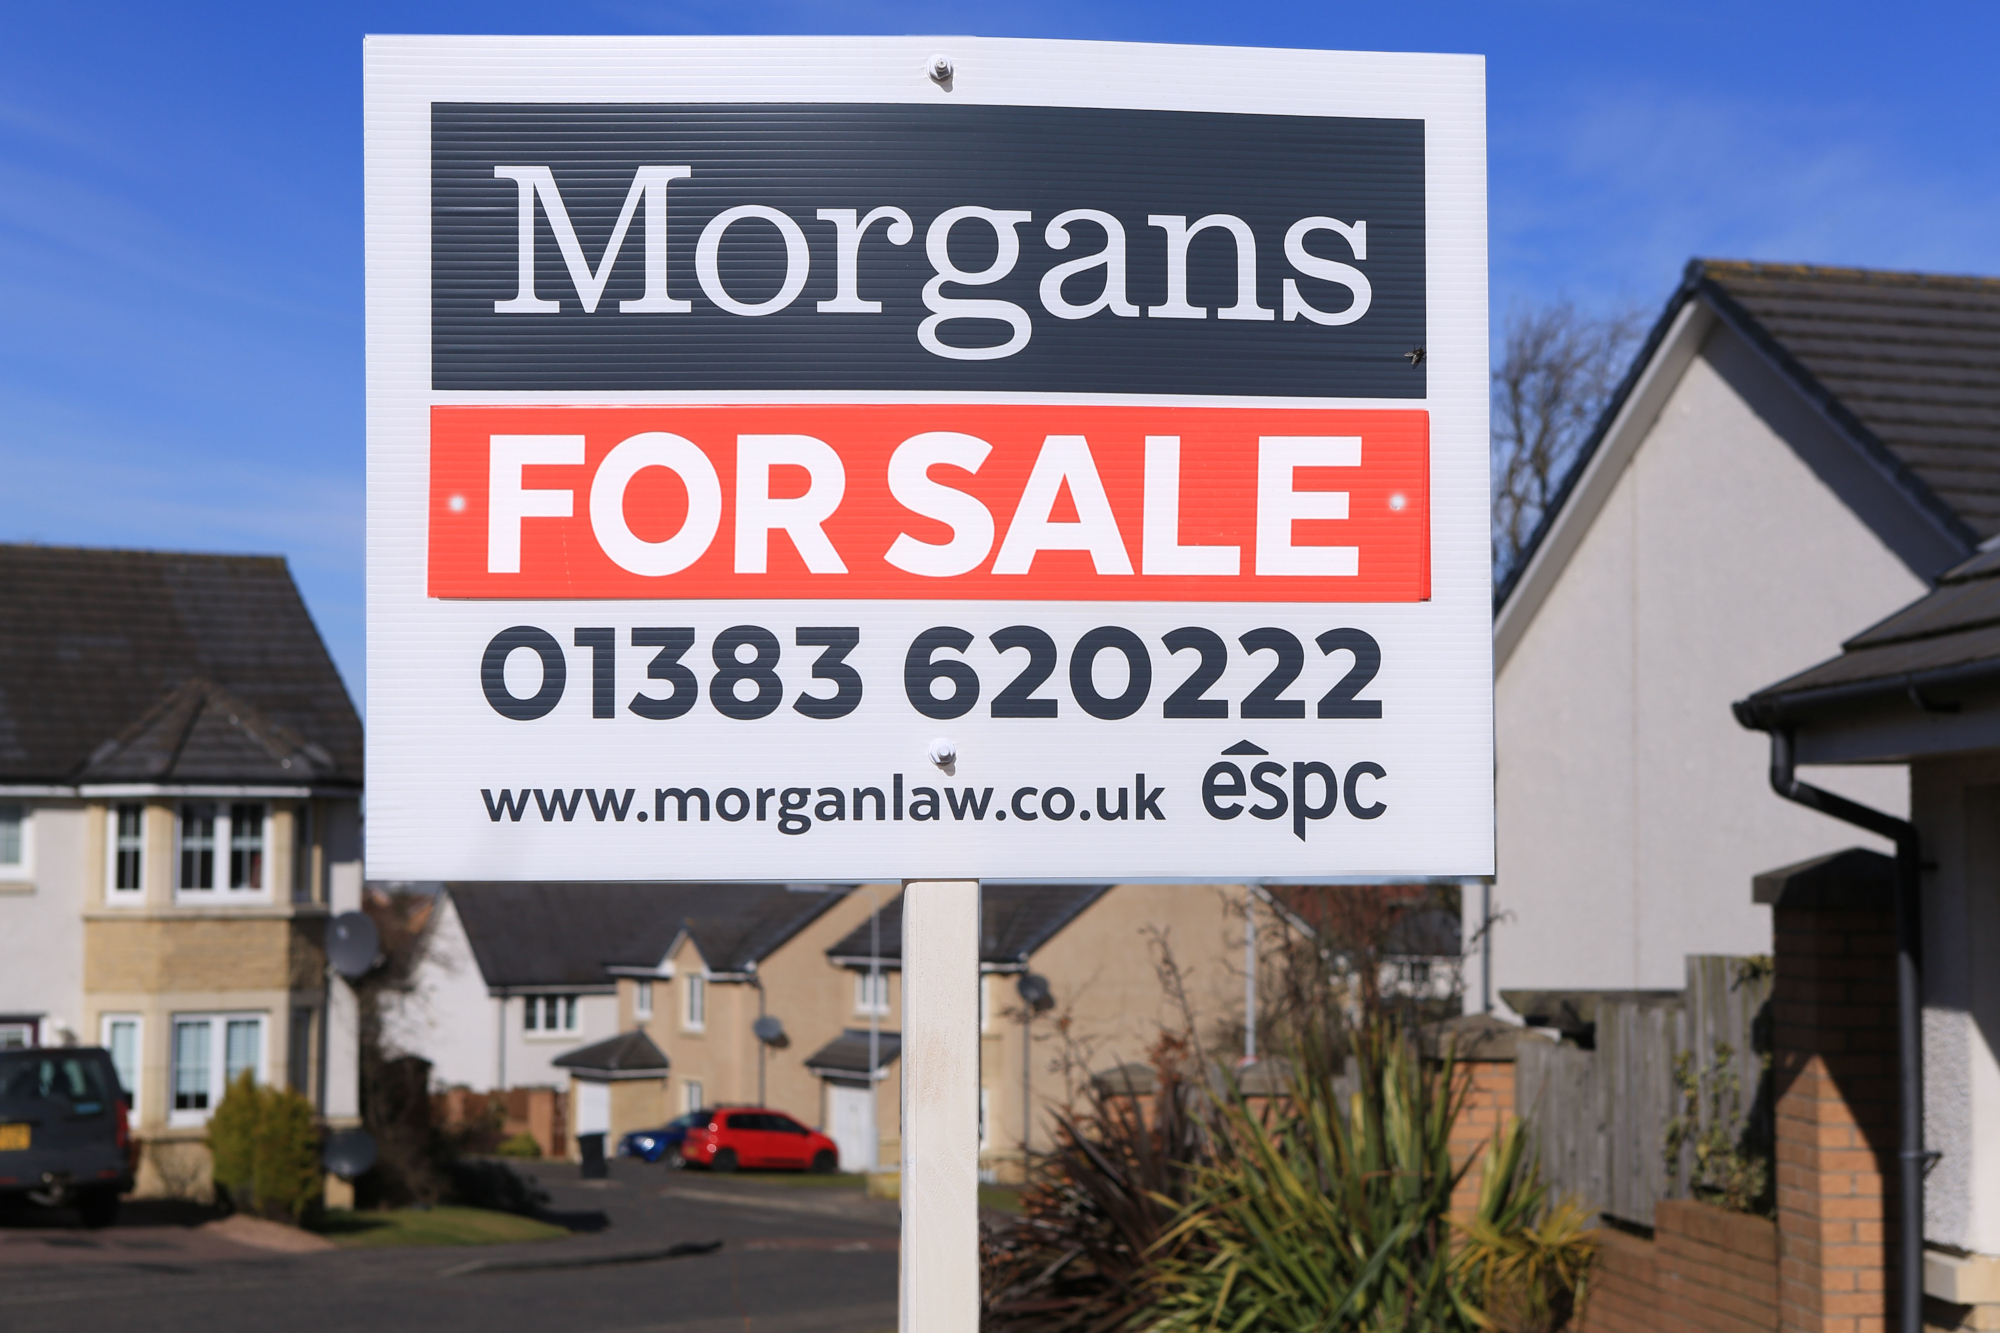 Morgans For Sale sign ready for when Scotland's housing market re-opens